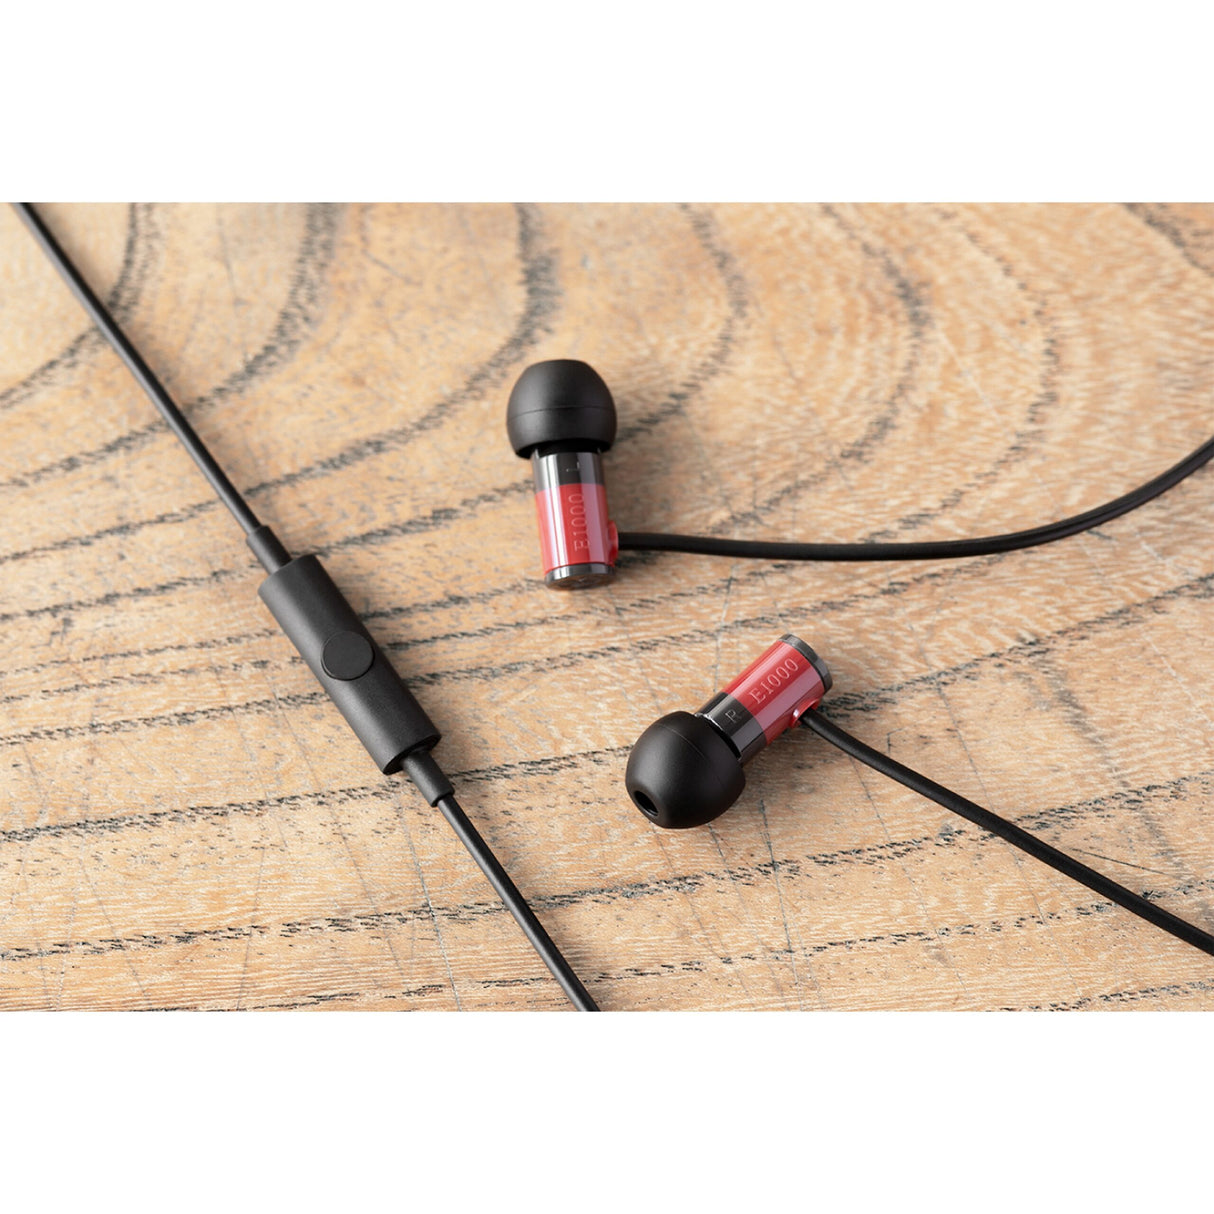 Final Audio E1000C In-Ear Noise Isolating Earphones with Microphone, Red